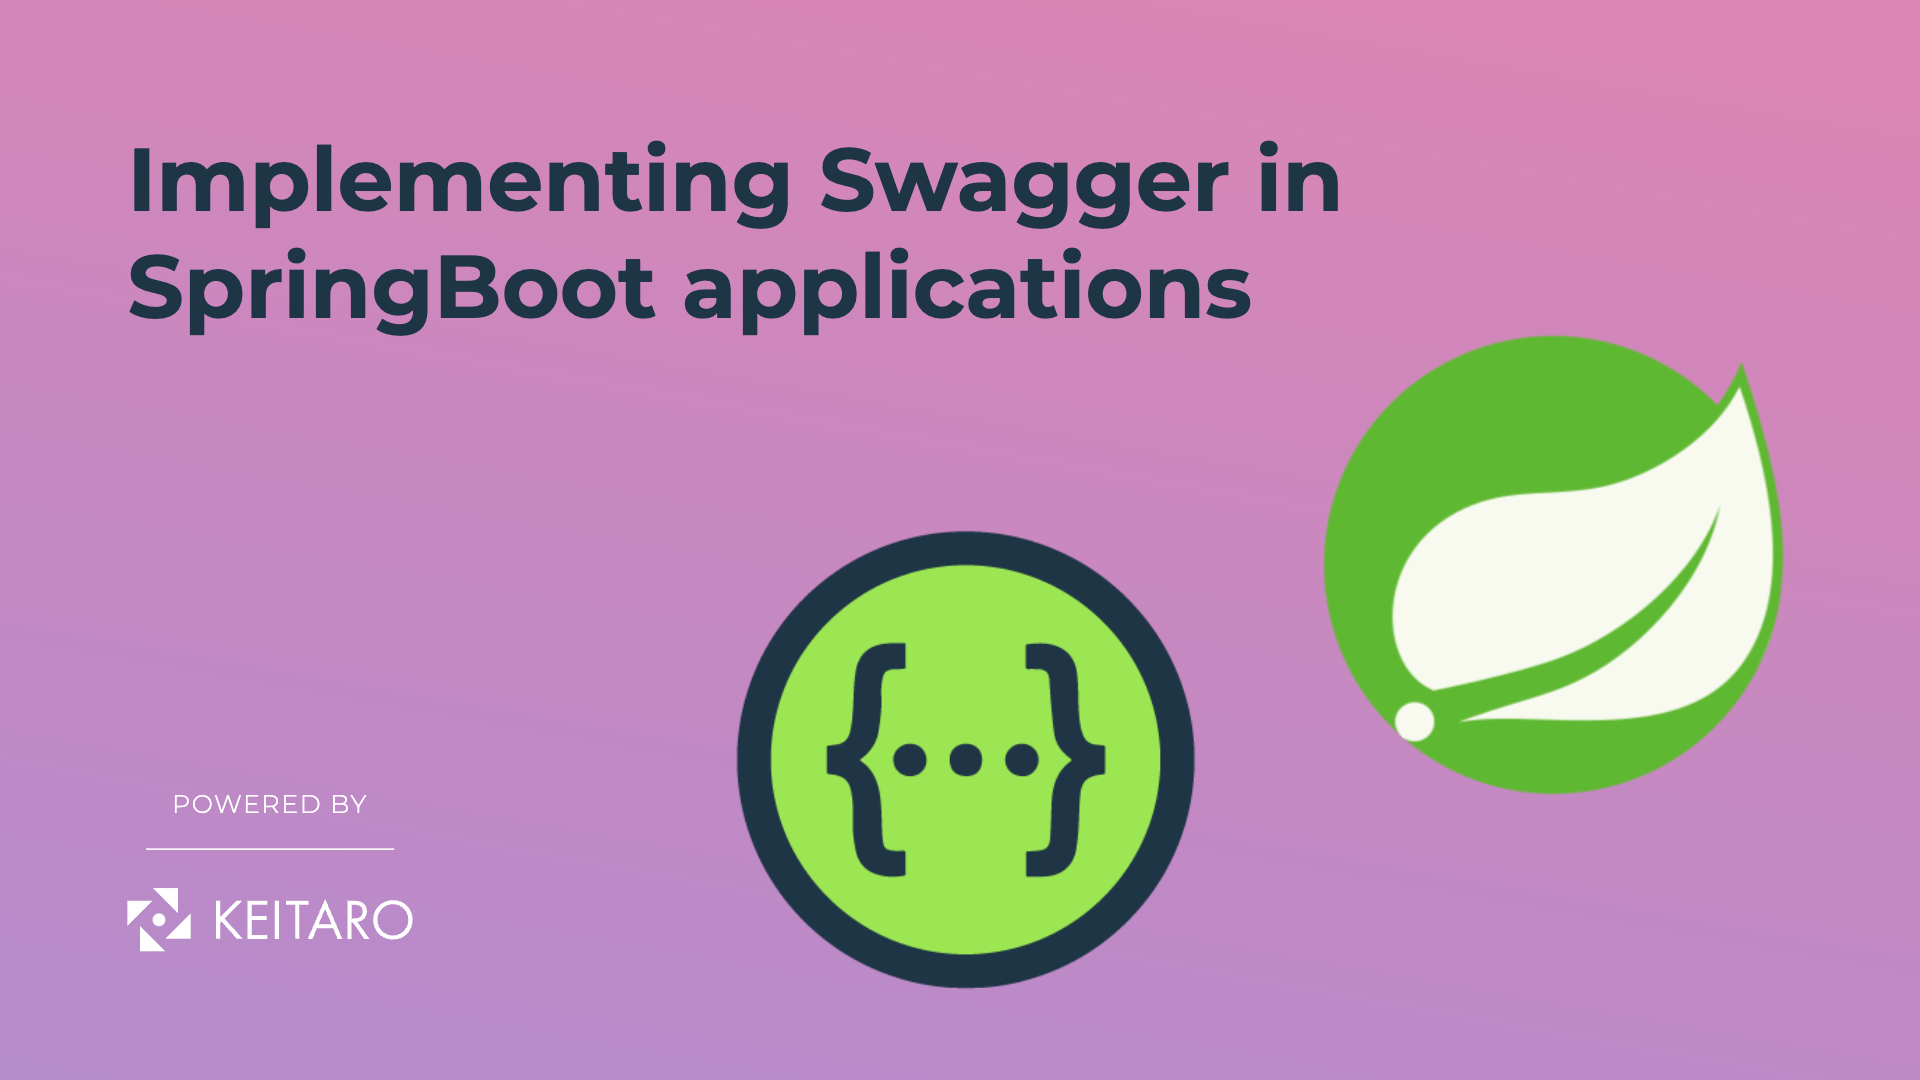 Keitaro-implementing Swagger in SpringBoot applications